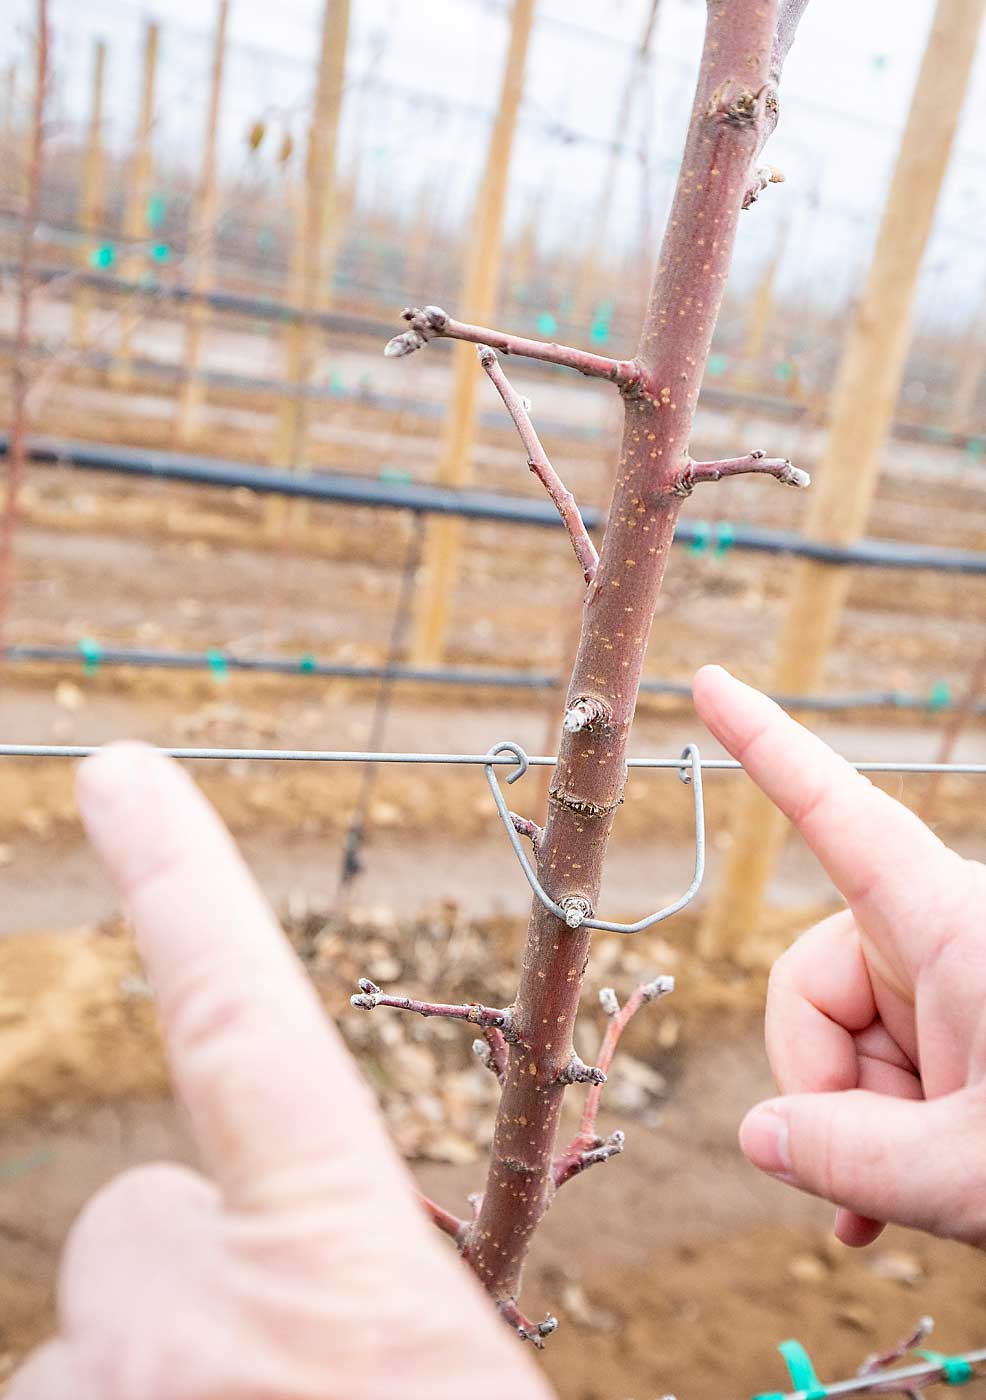 Instead of a typical nursery tree’s feathered branches, Goldy produced these trees to have 20 or so small dards, or short feathers, which is a better fit for the two-dimensional canopy he plans to manage. (TJ Mullinax/Good Fruit Grower)